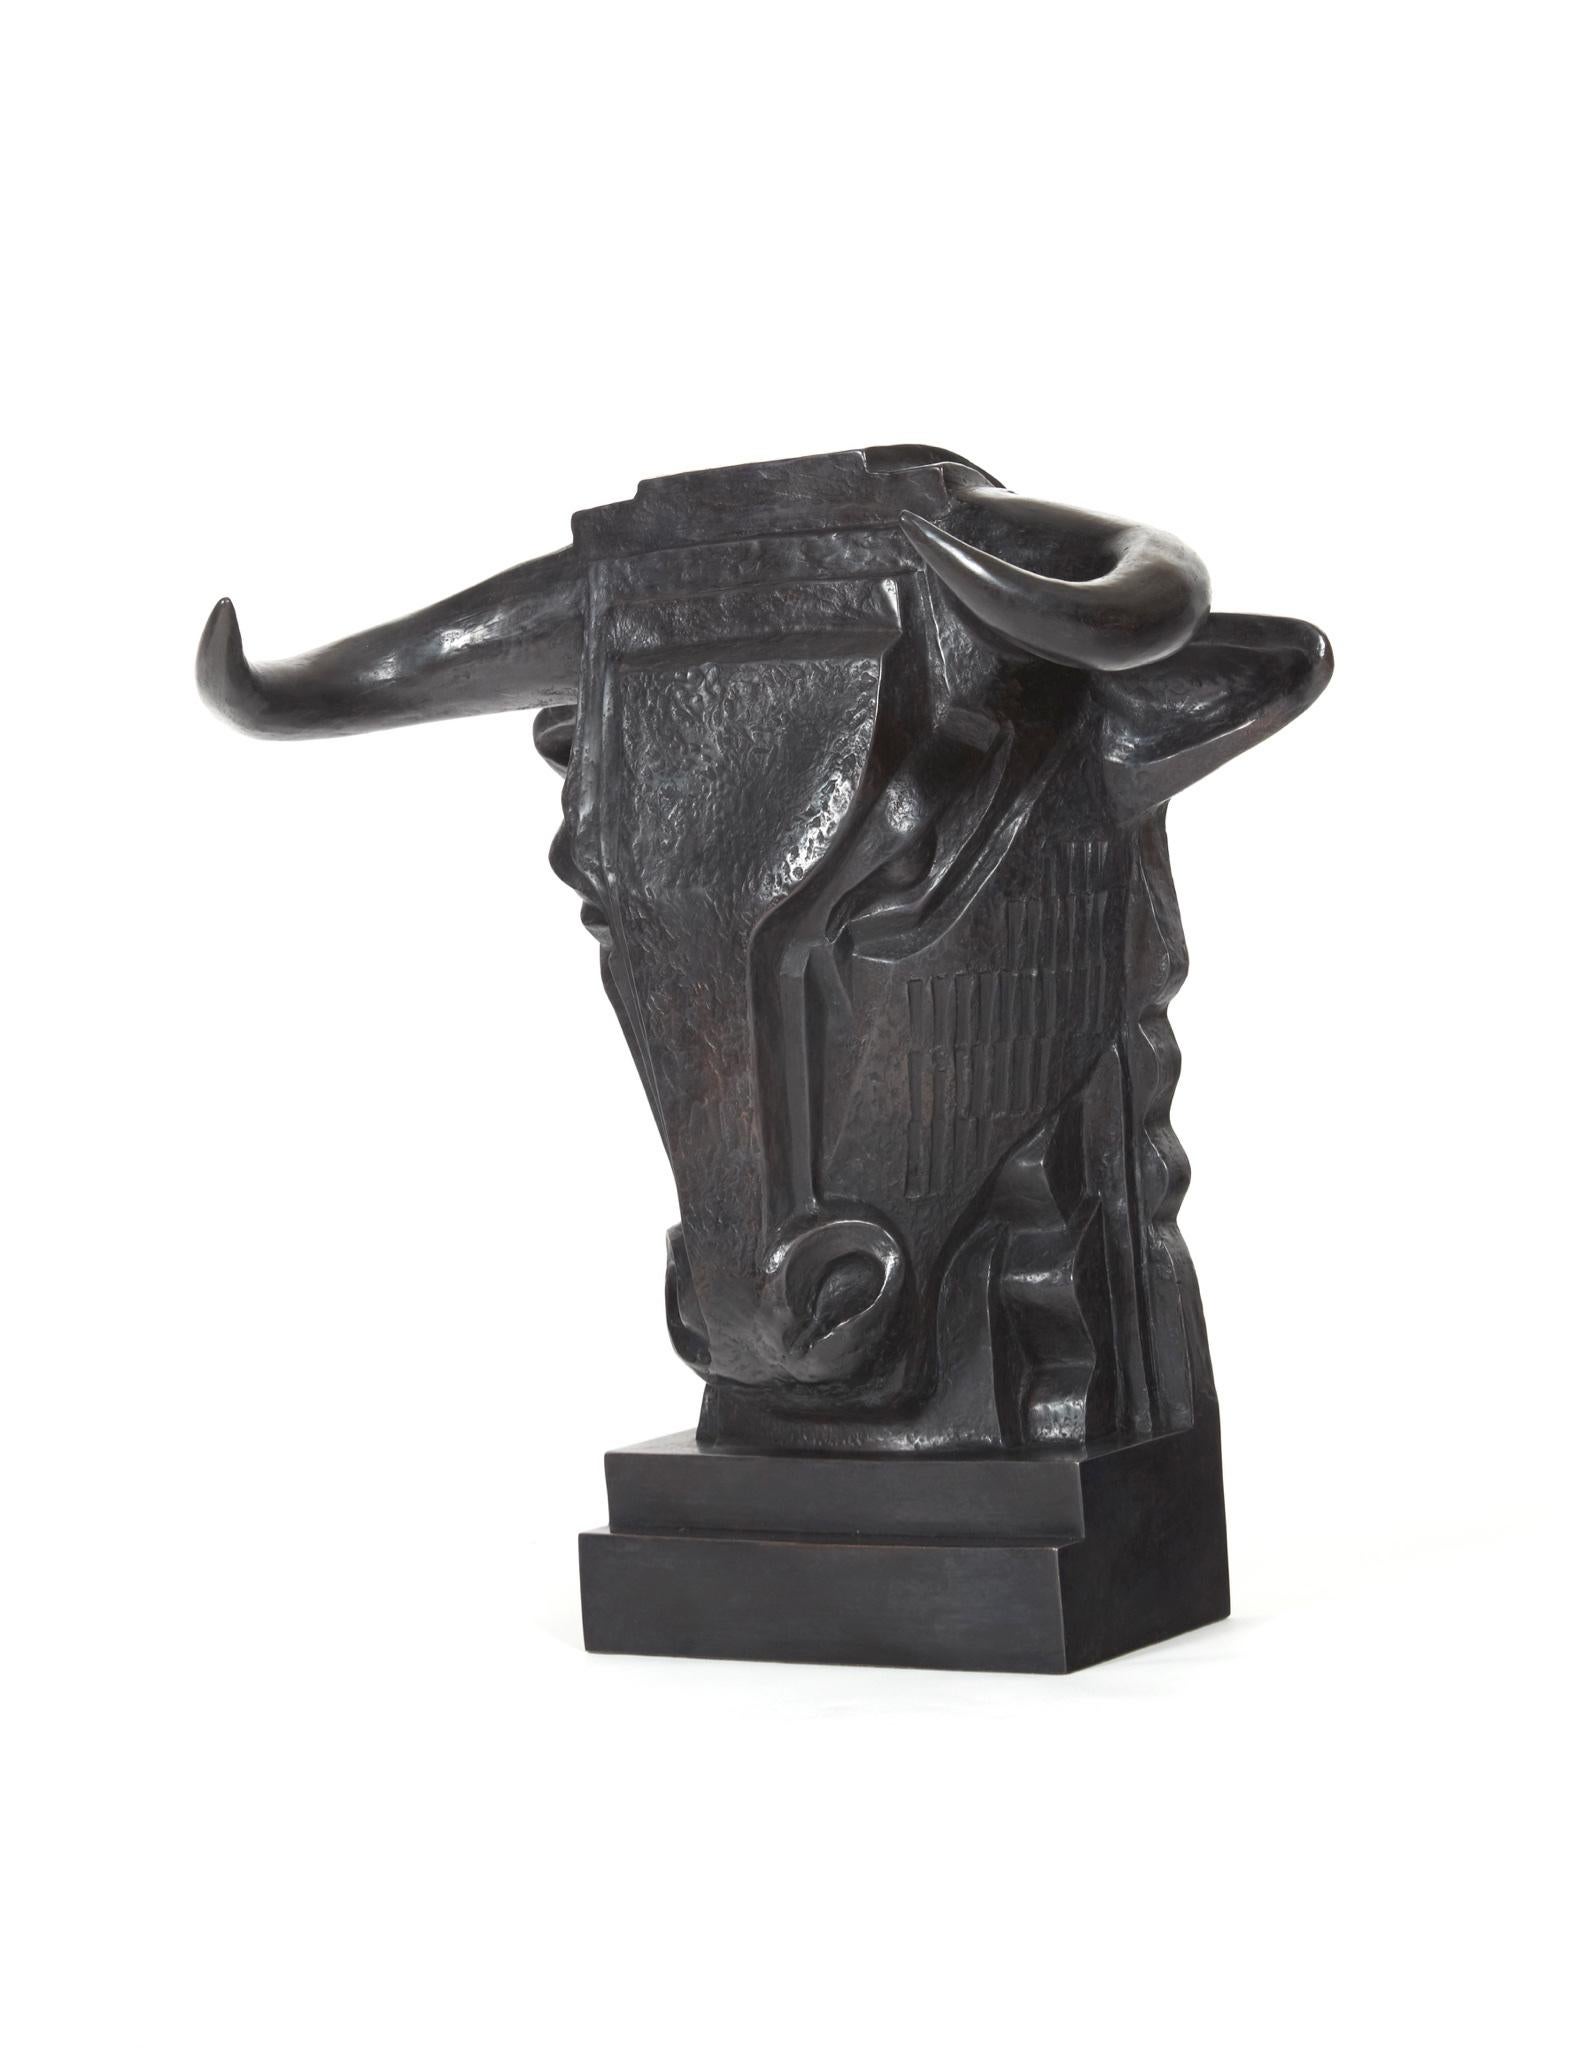 Bronze with black patina
Limited edition of 8
Signed and numbered 1/8 on the back
Monogram of the artist left side
Stamp of the founder on the back.